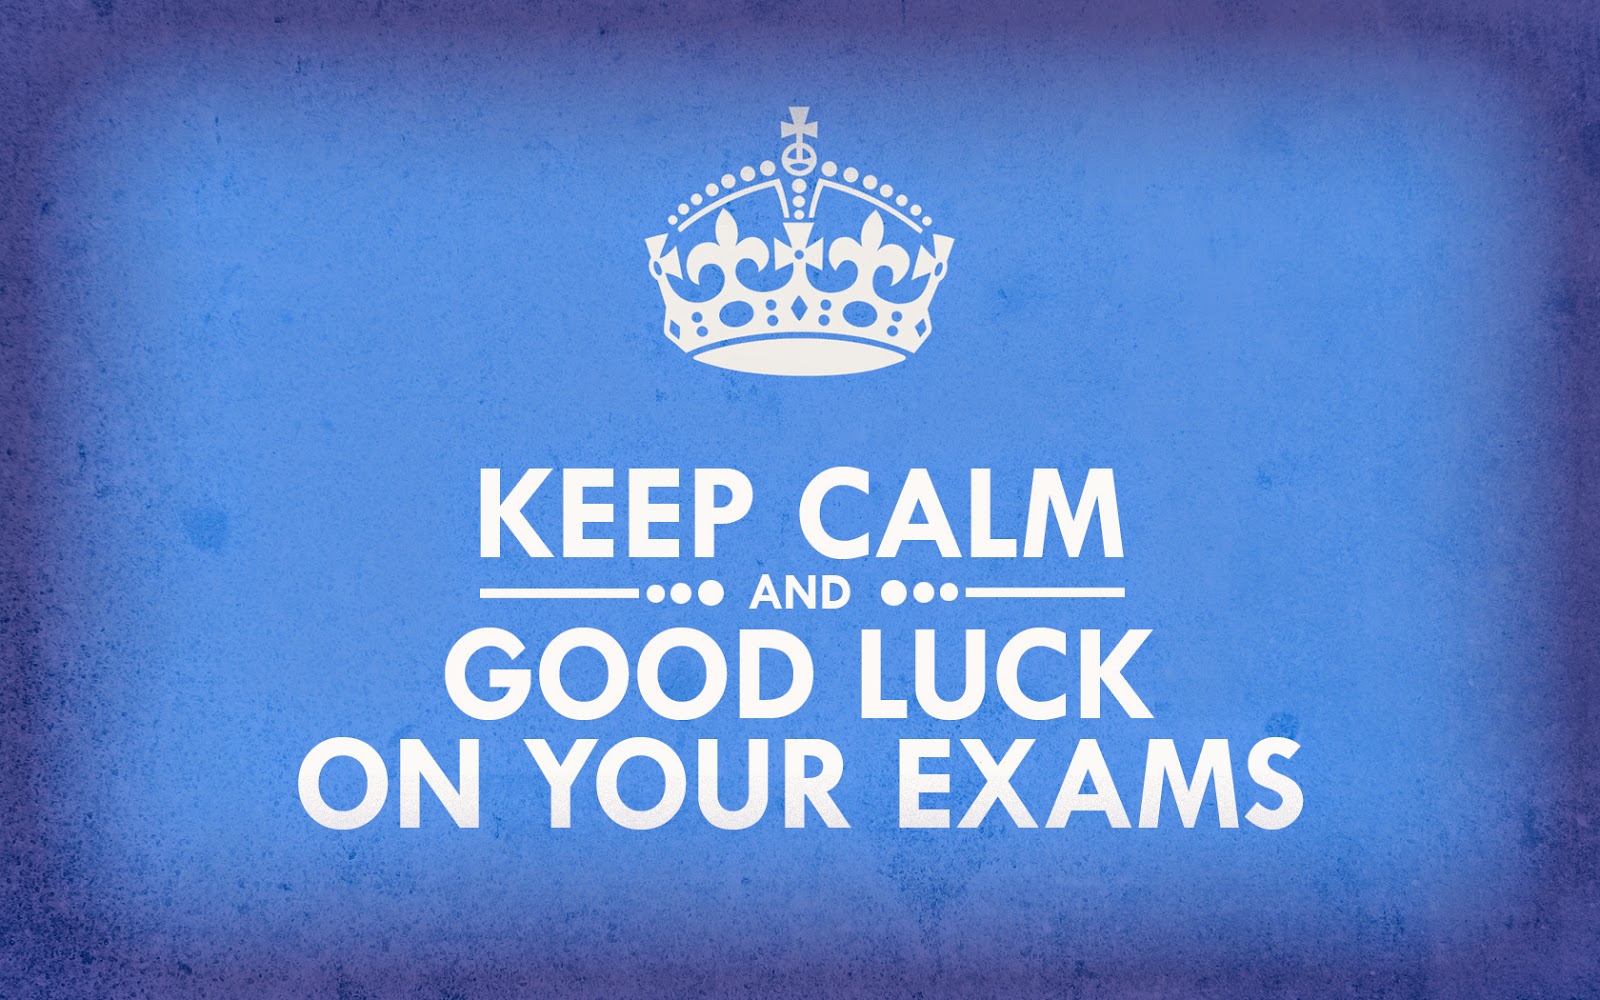 You well in your exam. Good luck Exam. Good luck on your Exam. Good luck in Exam. Good luck for your Exam.